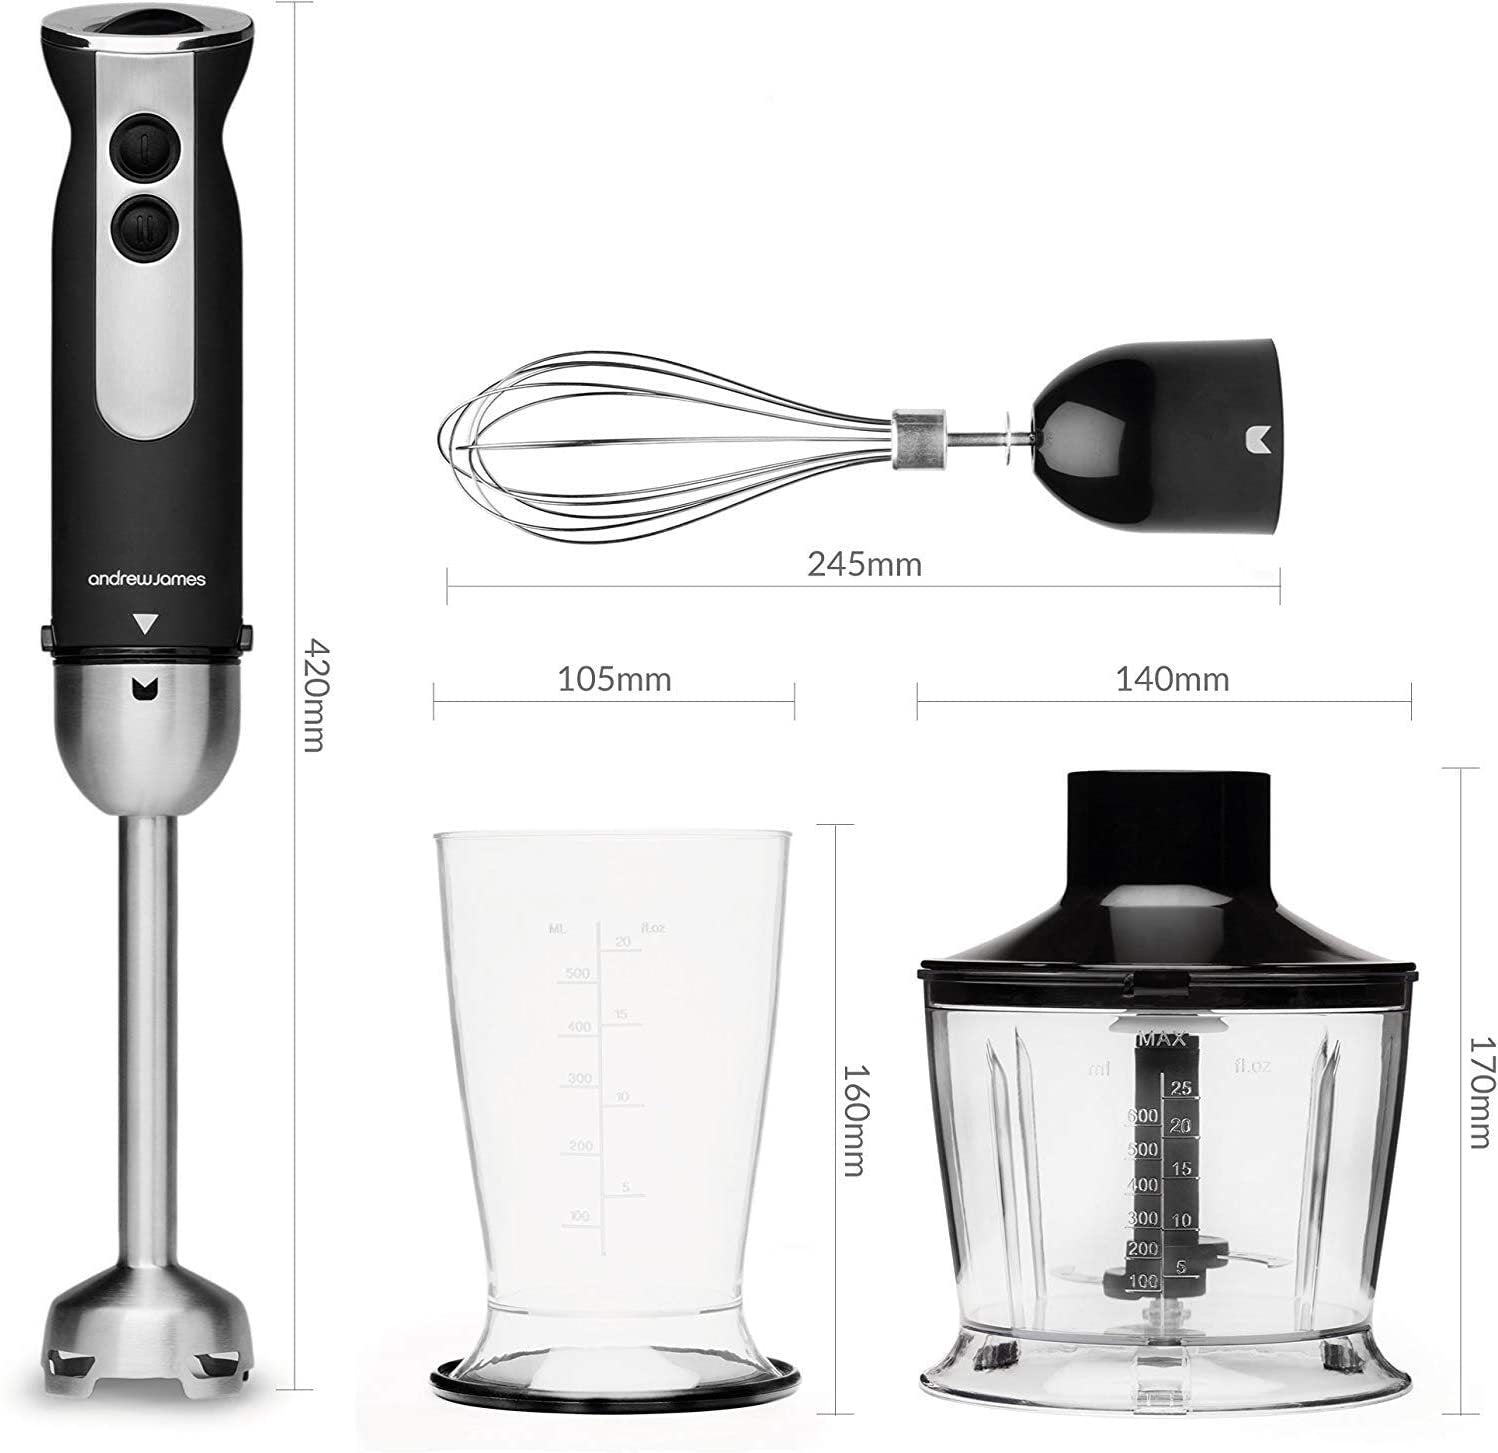 Masha by Sensio Home Official Electric Potato Masher, Hand Blender 3-in-1  Set Multi Tool - Blends, Purees and Whisks